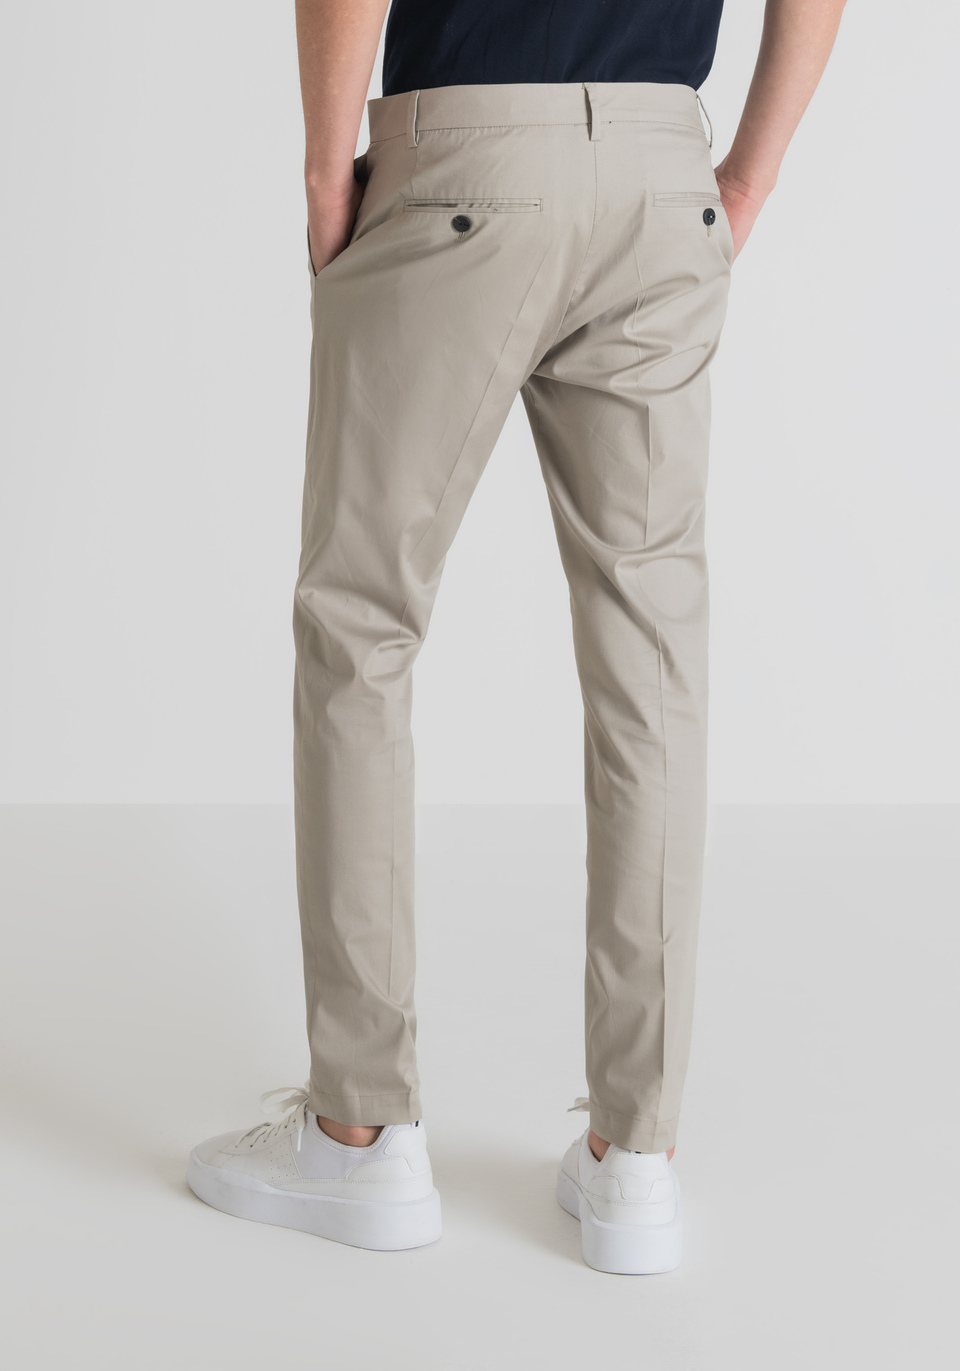 SKINNY-FIT “BRYAN” TROUSERS MADE FROM STRETCHY COTTON TWILL - Antony Morato Online Shop